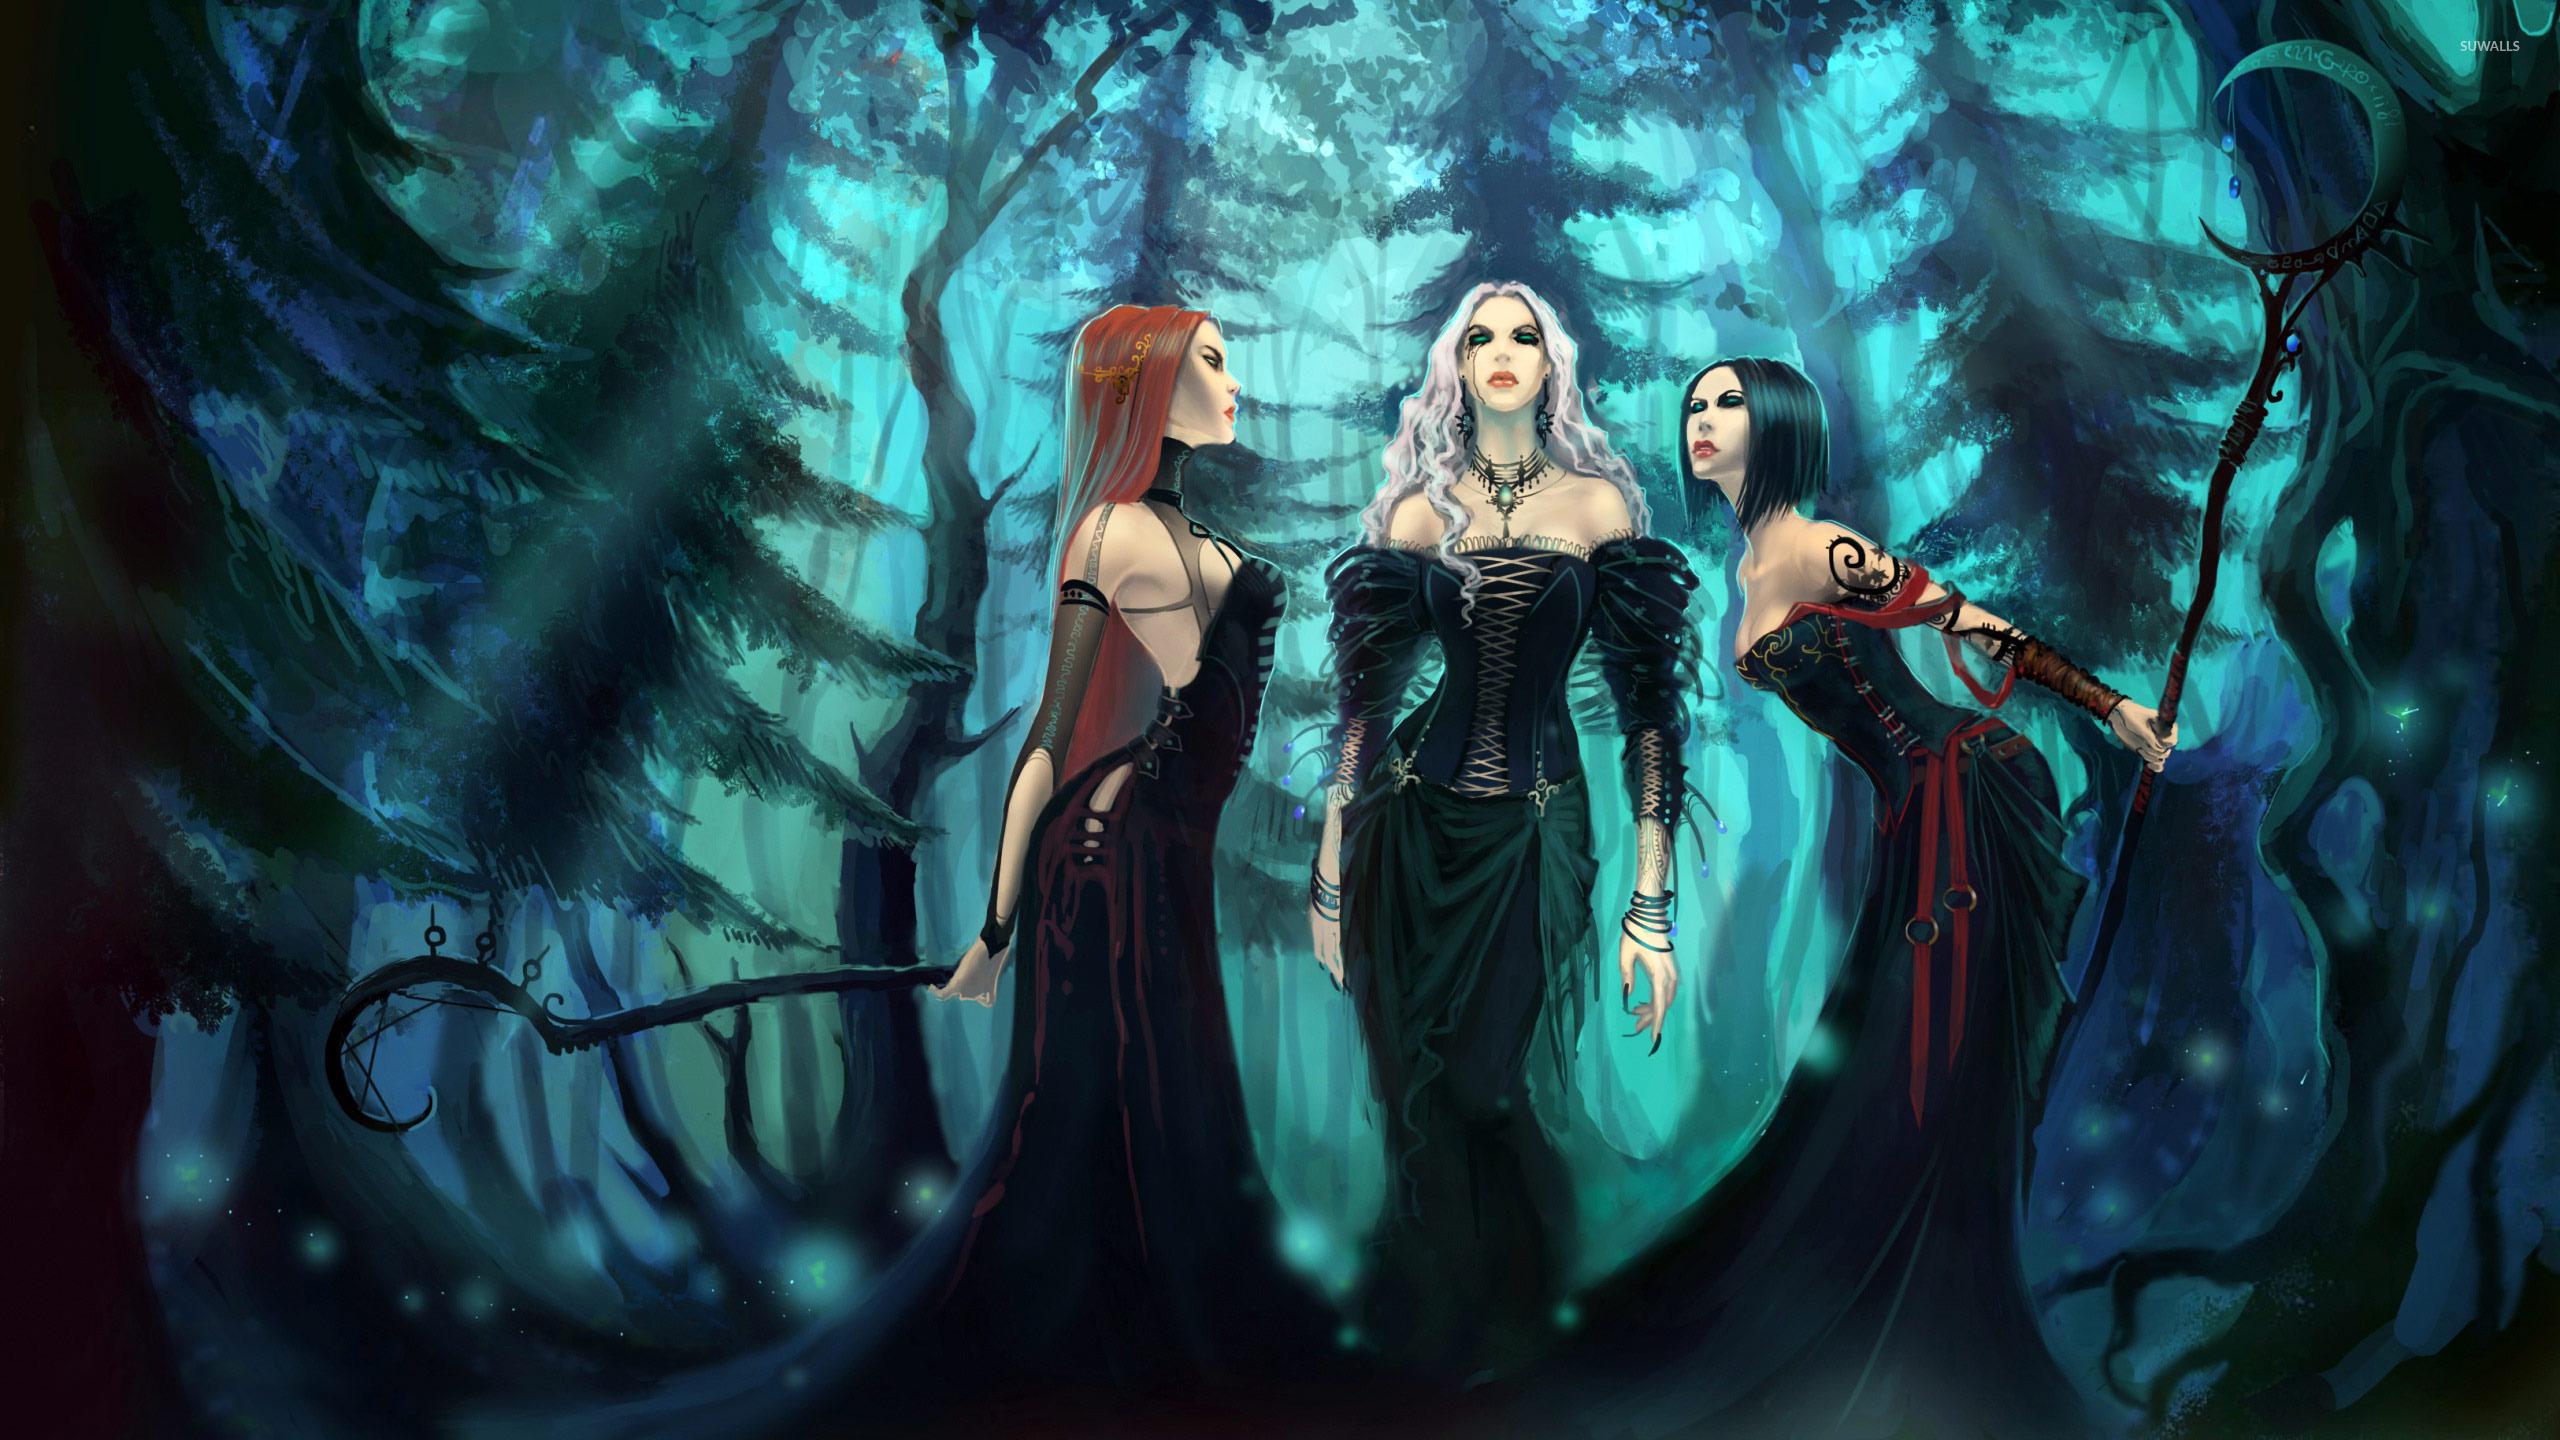 Witches in the forest wallpaper wallpaper